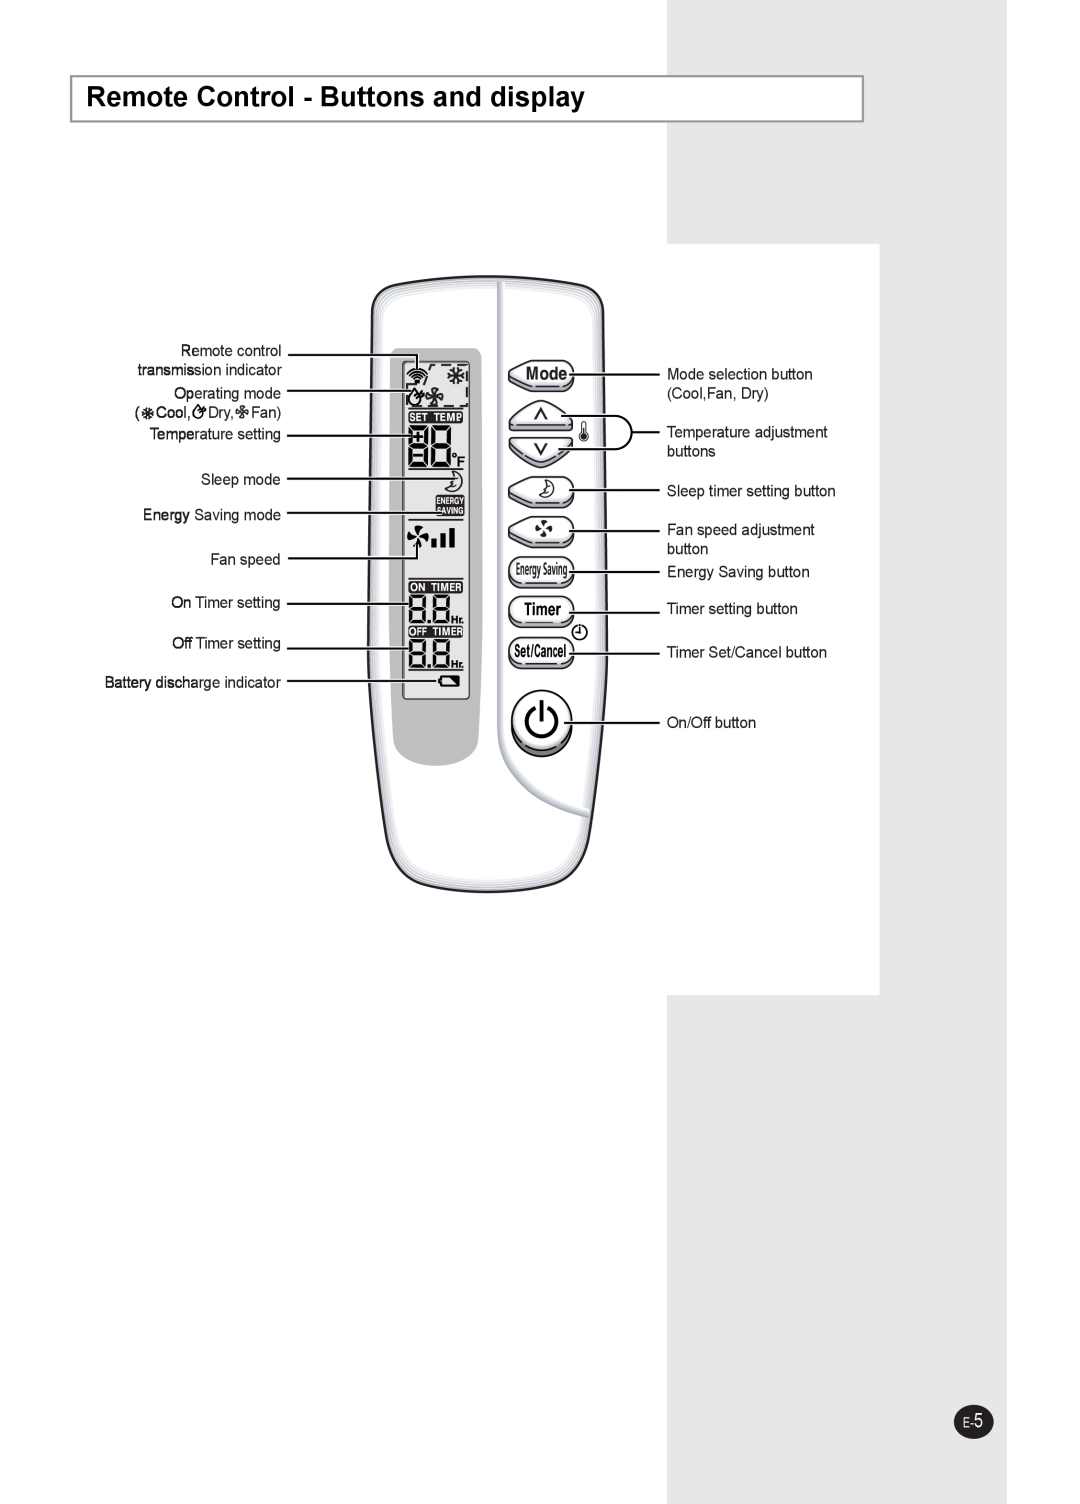 Samsung AW0593L, AW0693L, AW1893L, AW1293L, AW1093L, AW0893L manual Remote Control - Buttons and display 